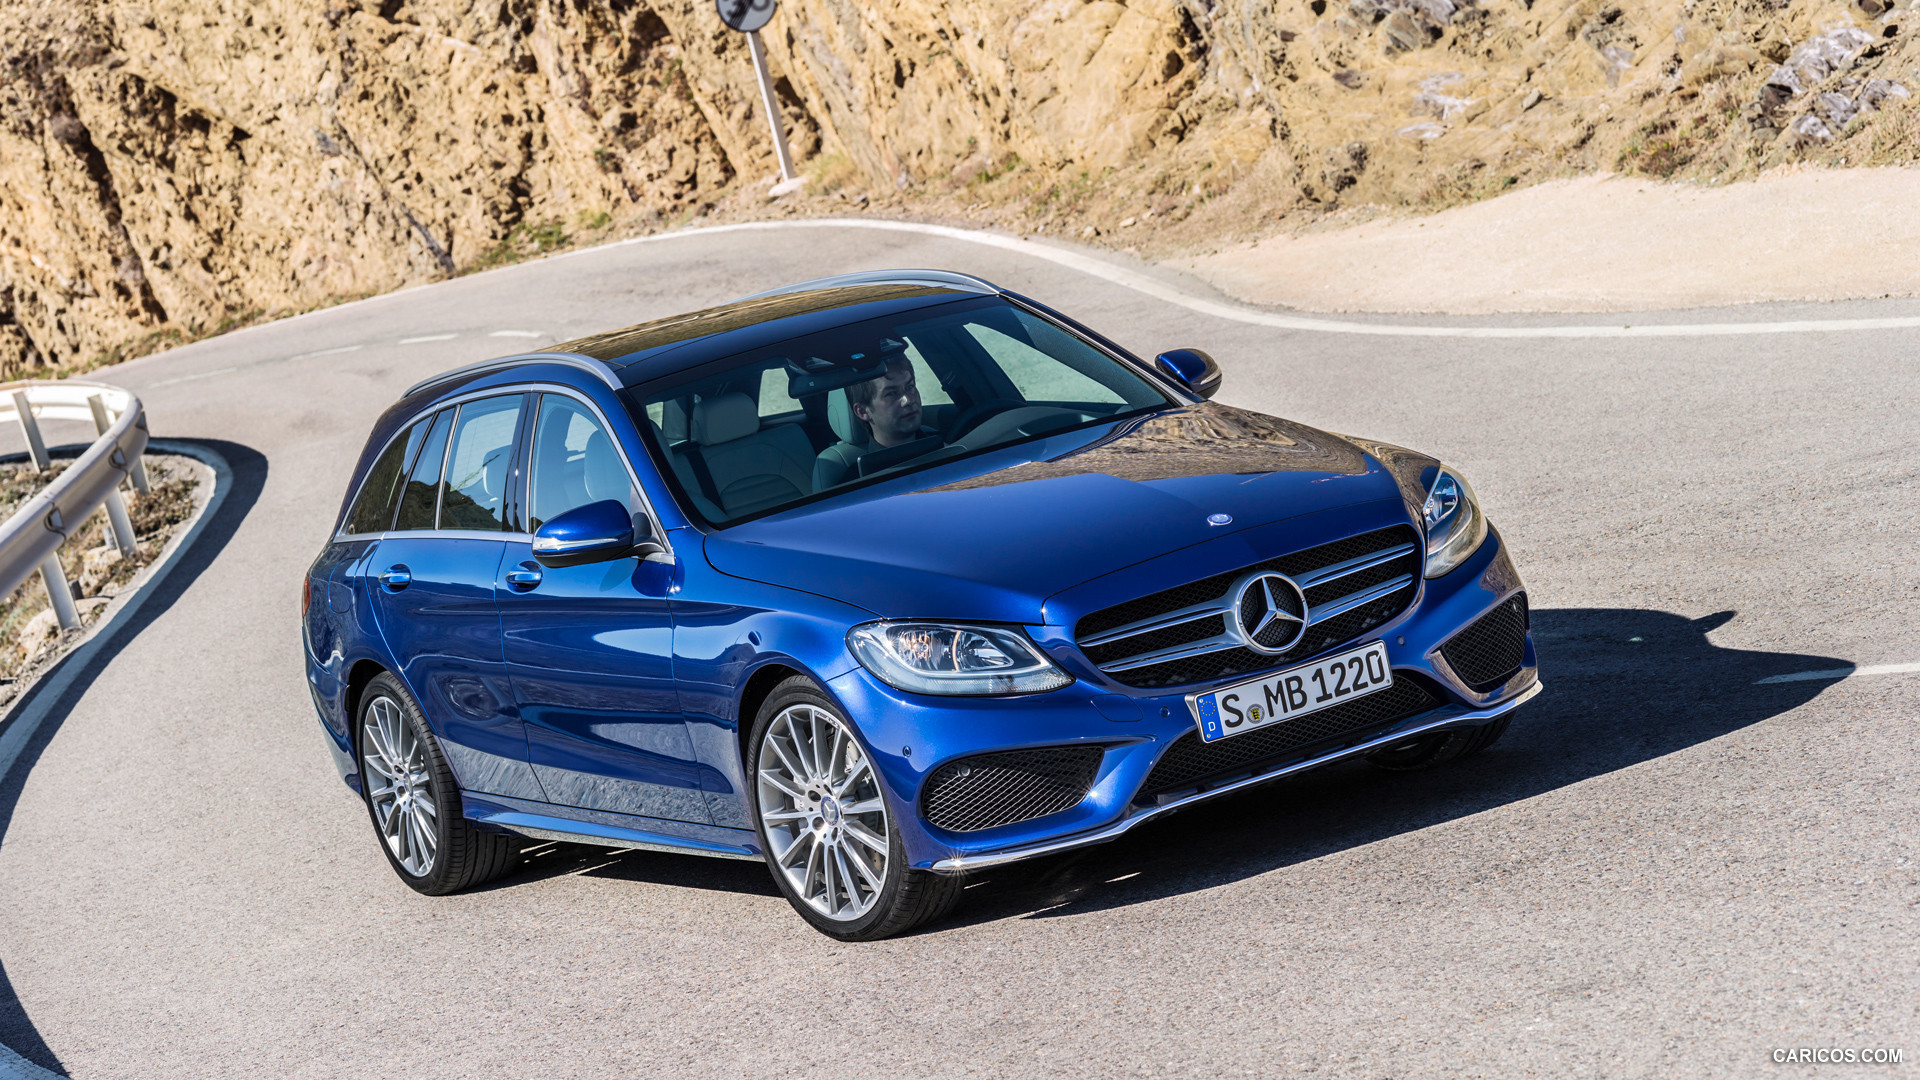 2015 Mercedes-Benz C-Class Estate C250 BlueTEC 4MATIC (AMG sports package) - Front, #58 of 173